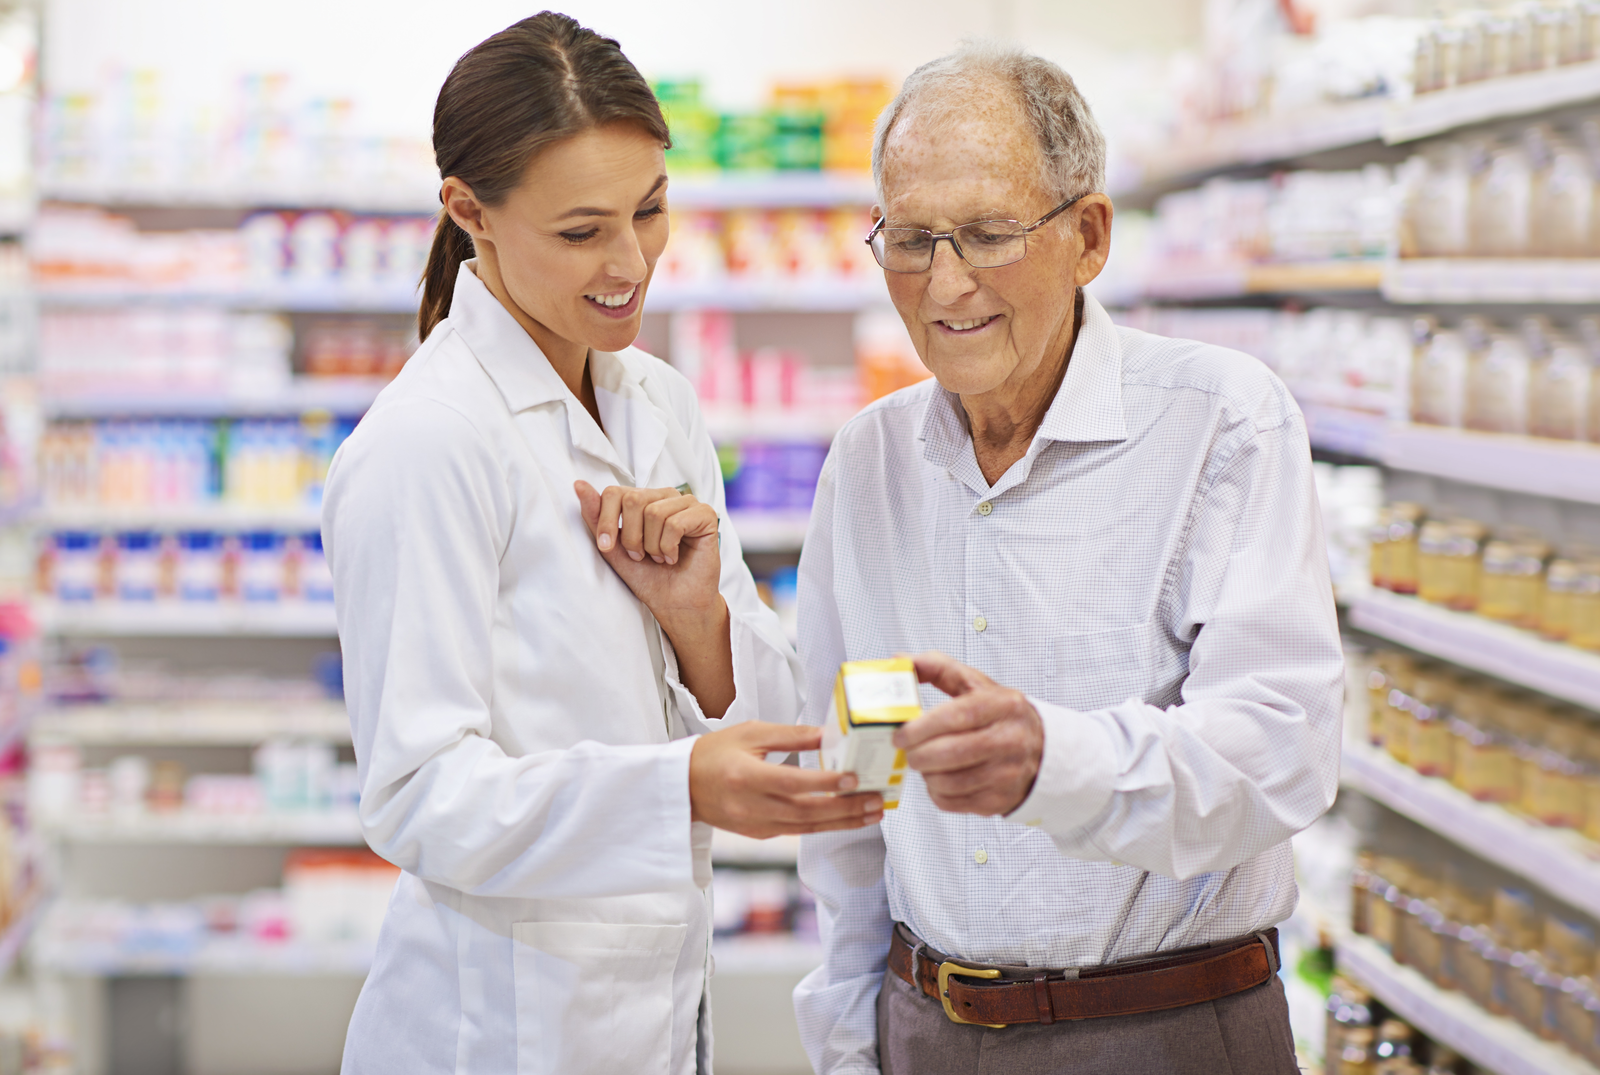 patient talking with pharmacist